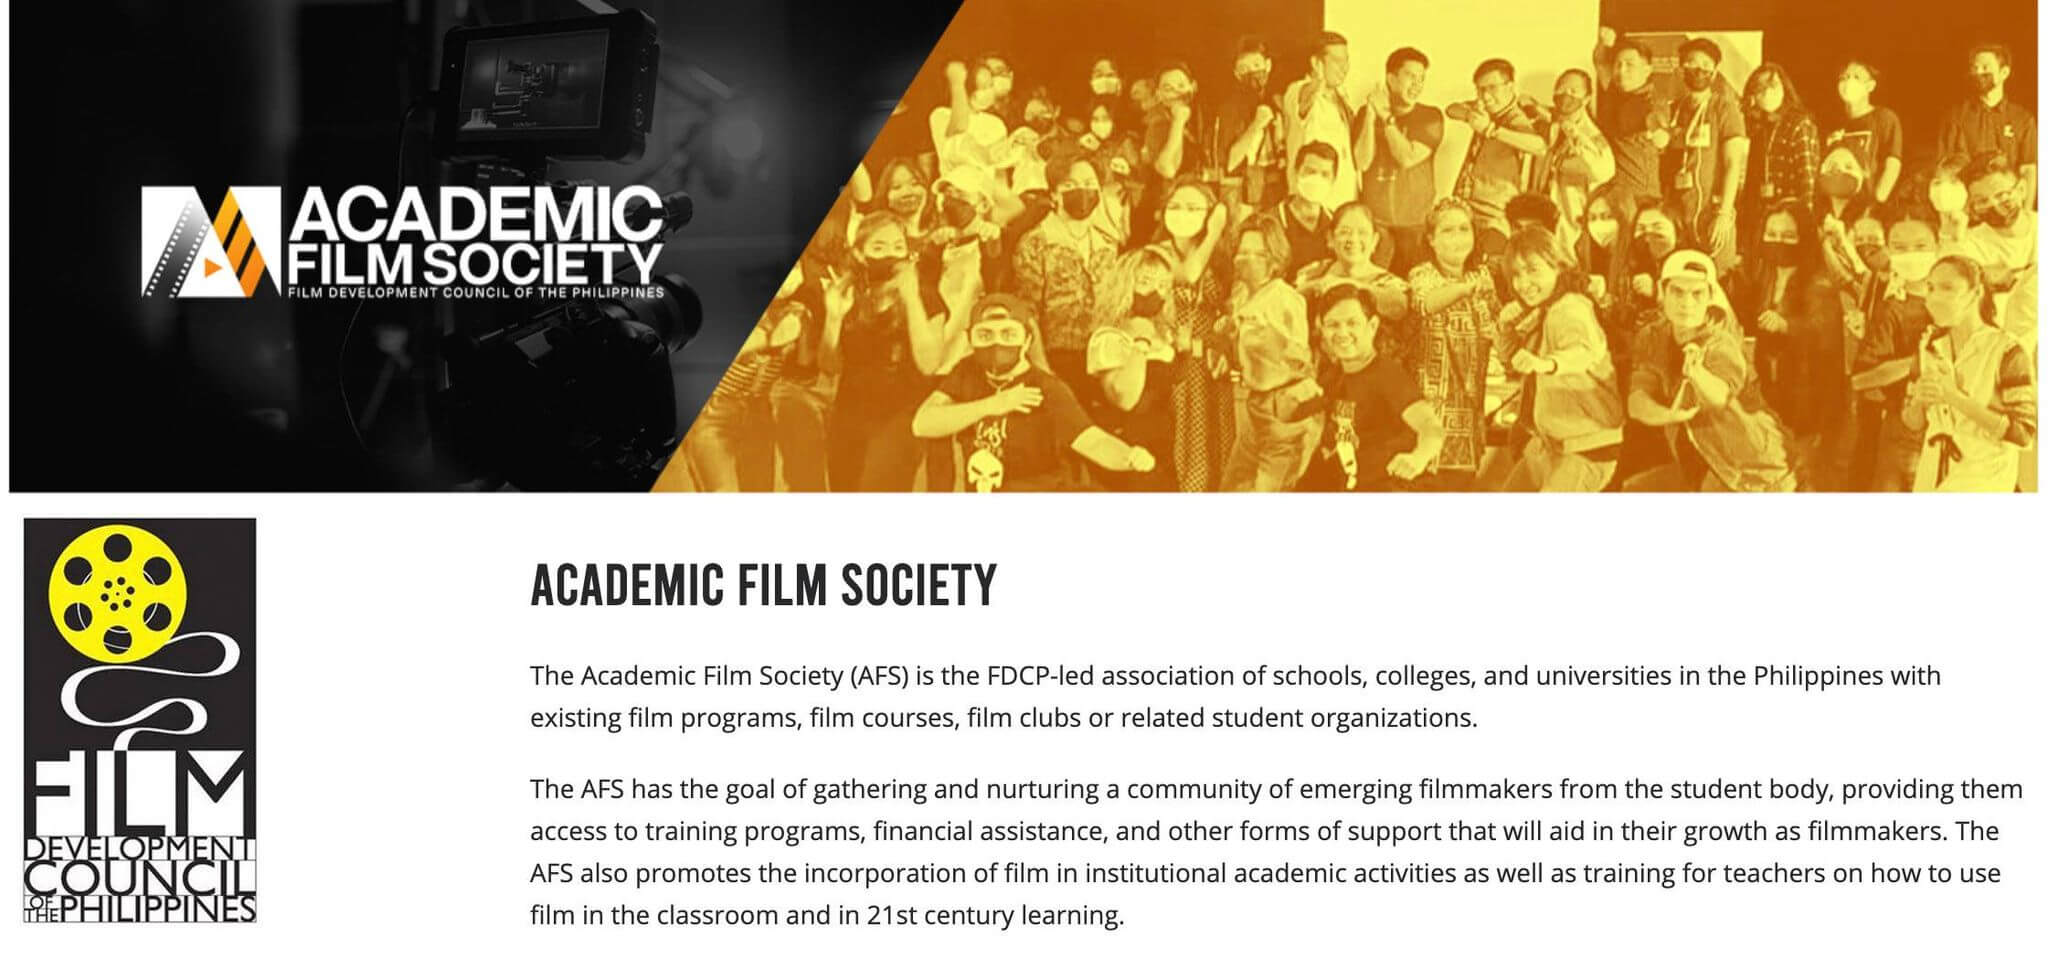 University of the Philippines Visayas joins Academic Film Society, strengthening commitment to film education